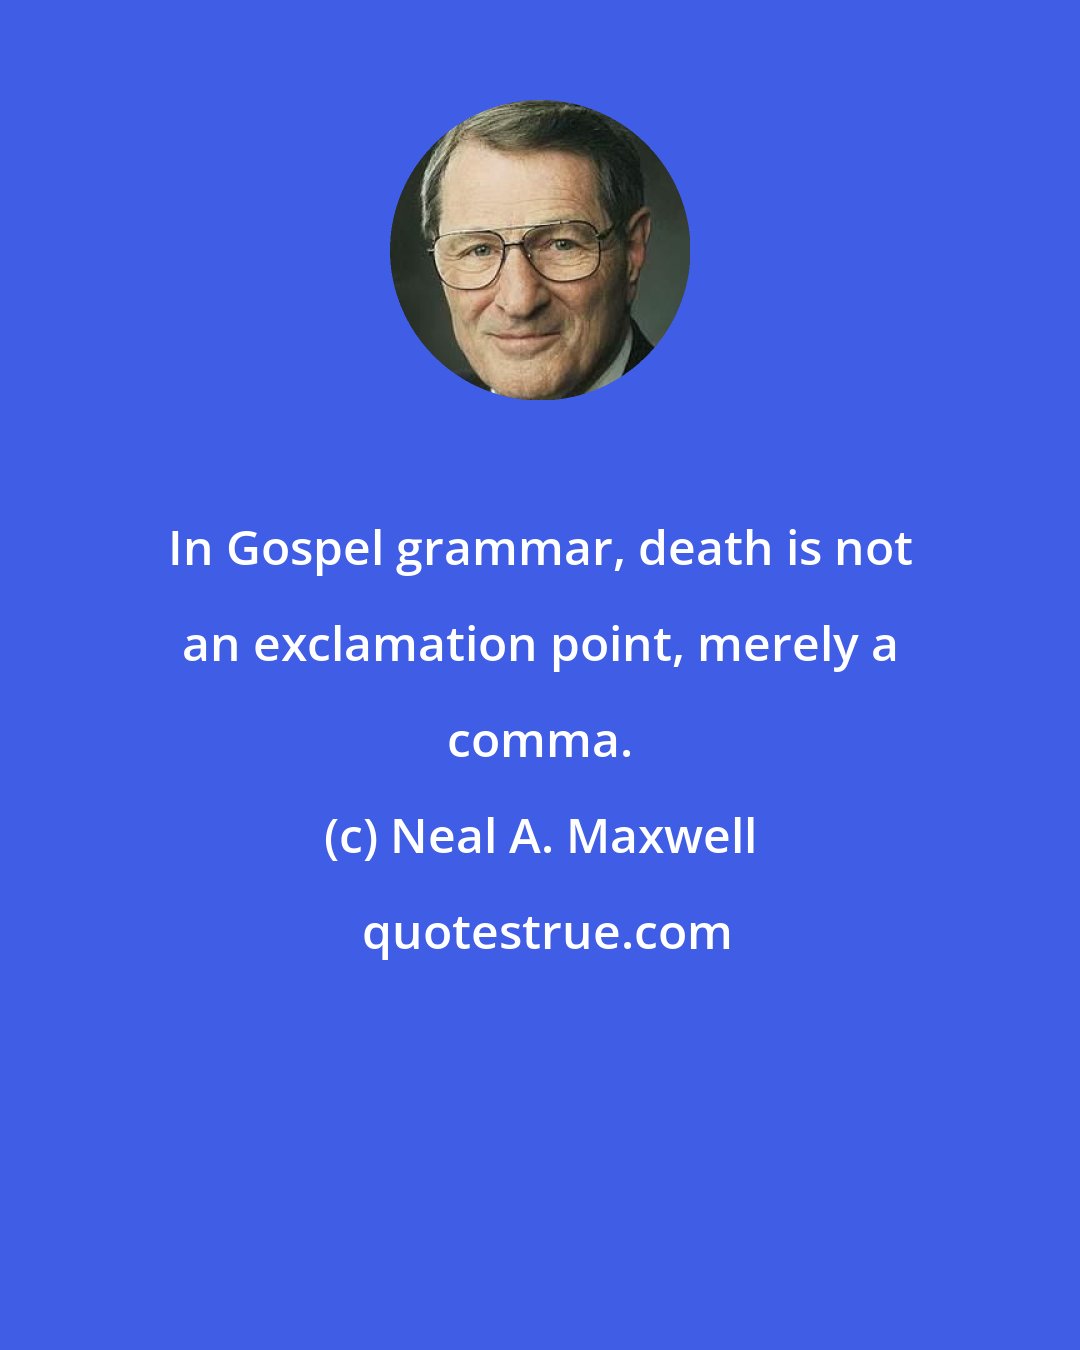 Neal A. Maxwell: In Gospel grammar, death is not an exclamation point, merely a comma.